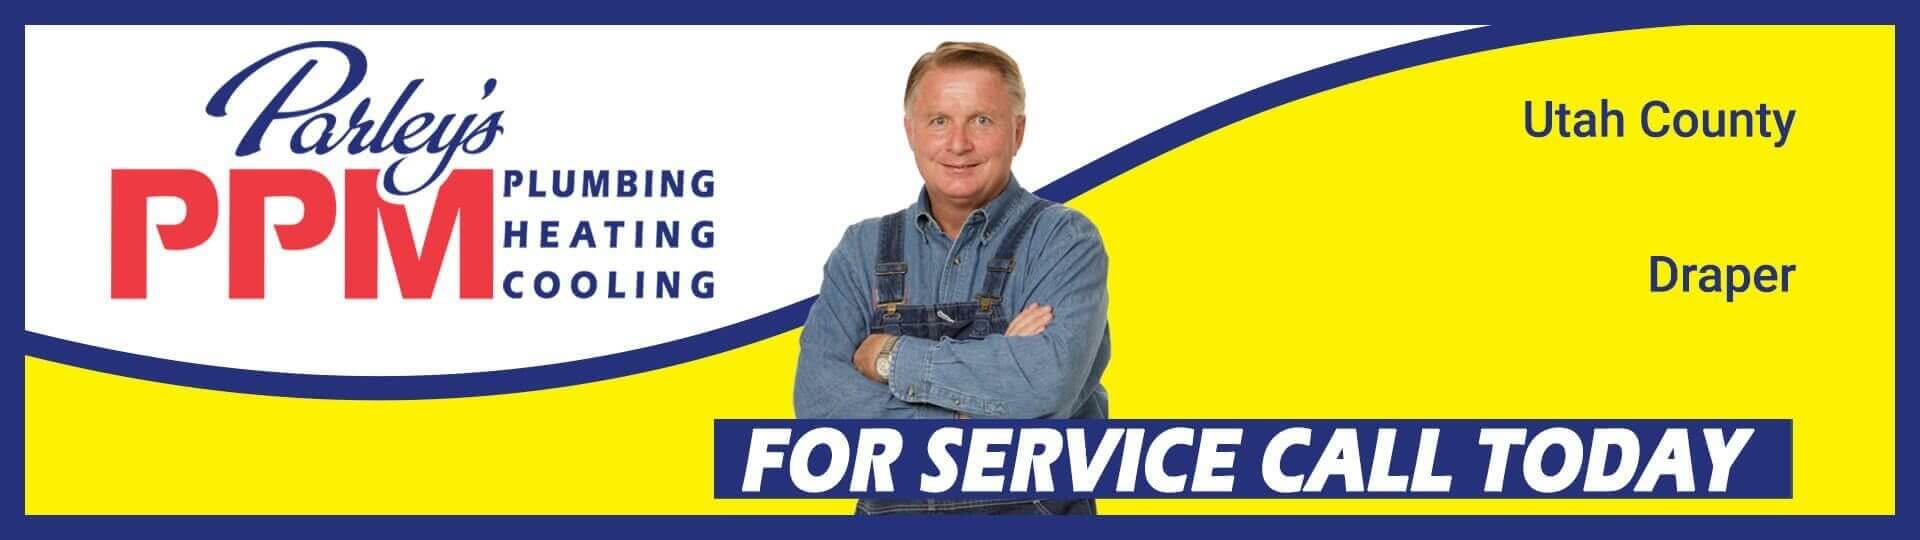 Parley’s PPM Plumbing, Heating & Cooling